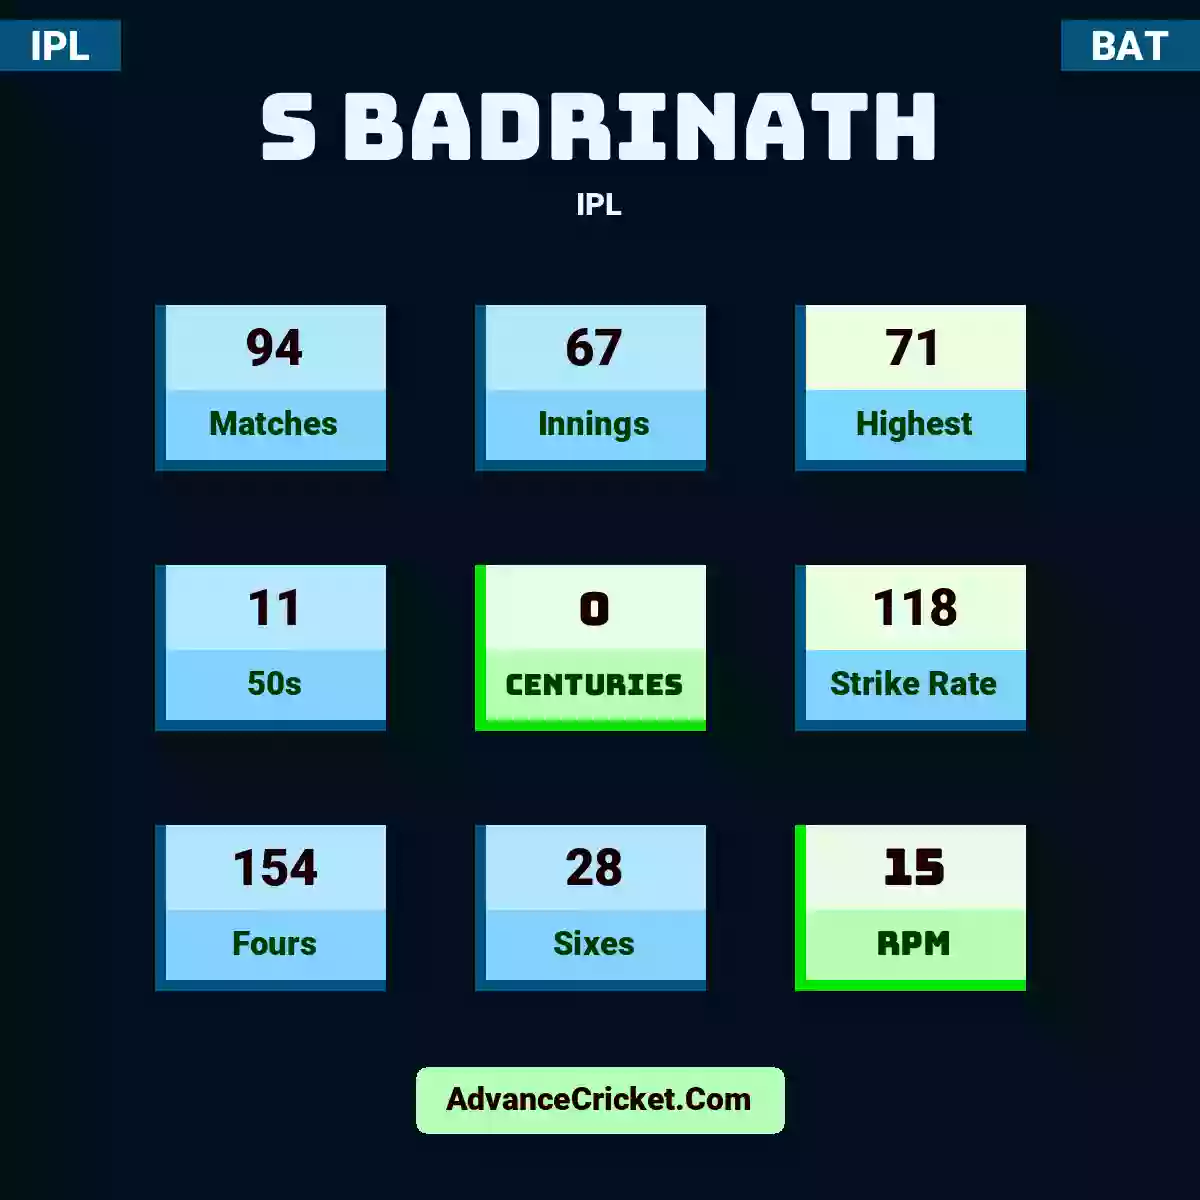 S Badrinath IPL , S Badrinath played 94 matches, scored 71 runs as highest, 11 half-centuries, and 0 centuries, with a strike rate of 118. S.Badrinath hit 154 fours and 28 sixes, with an RPM of 15.